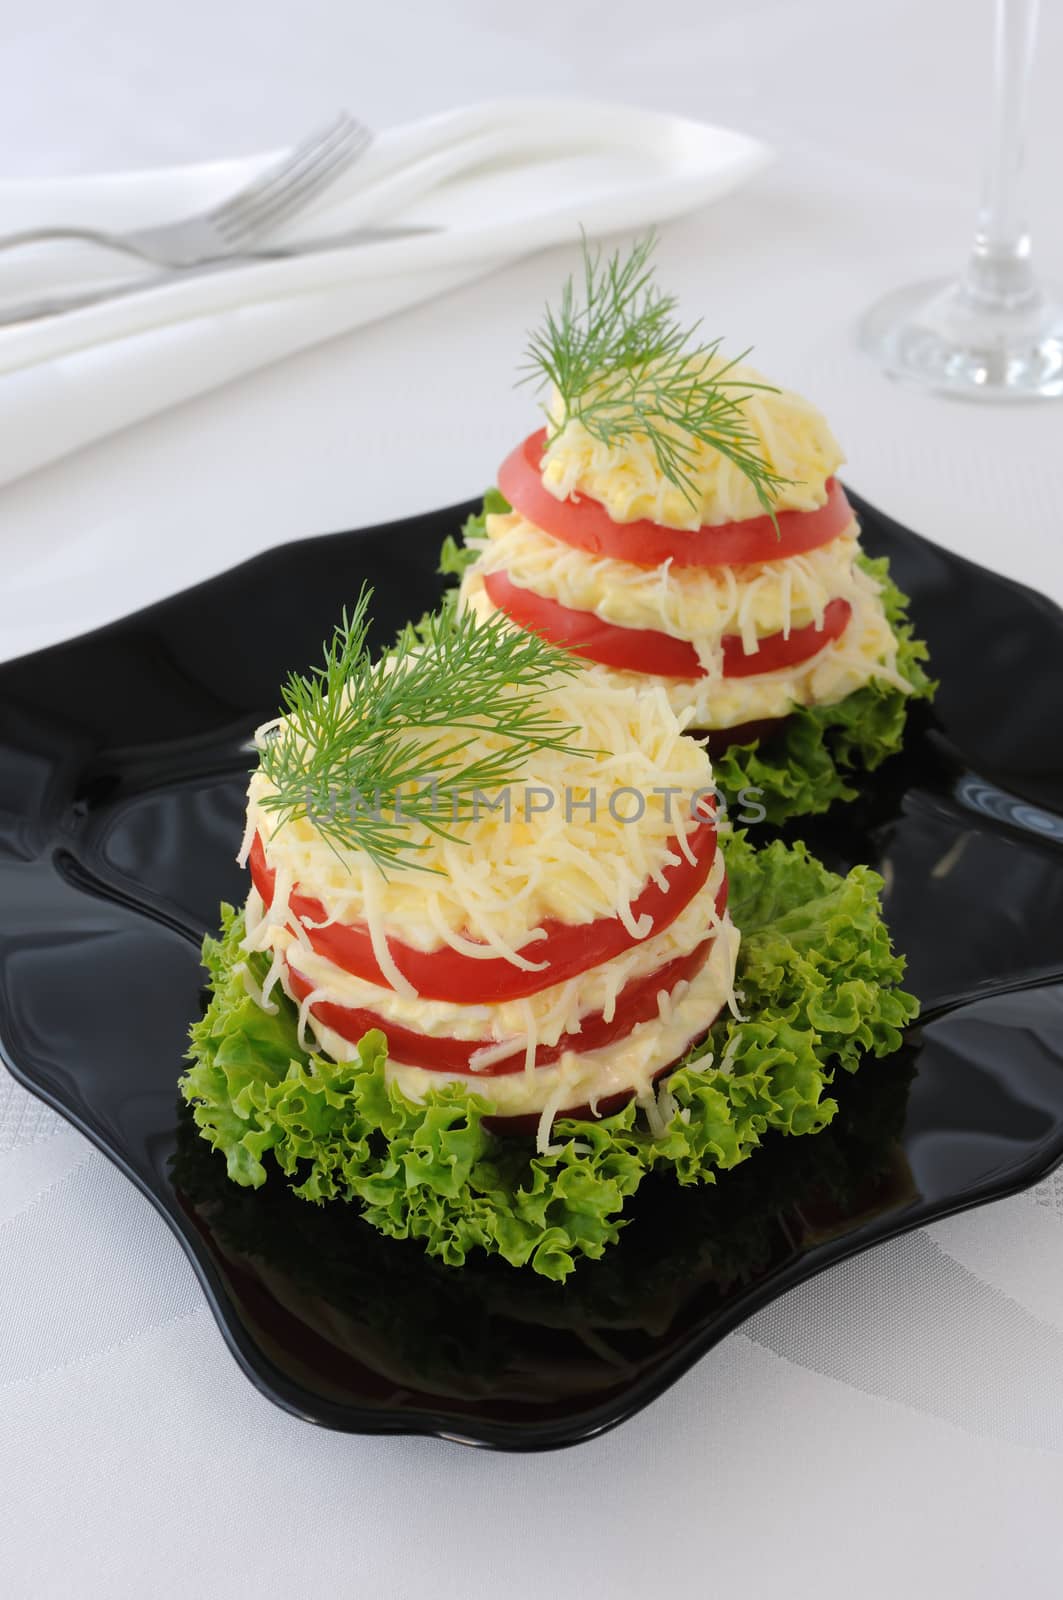 Columns of tomato with spicy stuffing by Apolonia